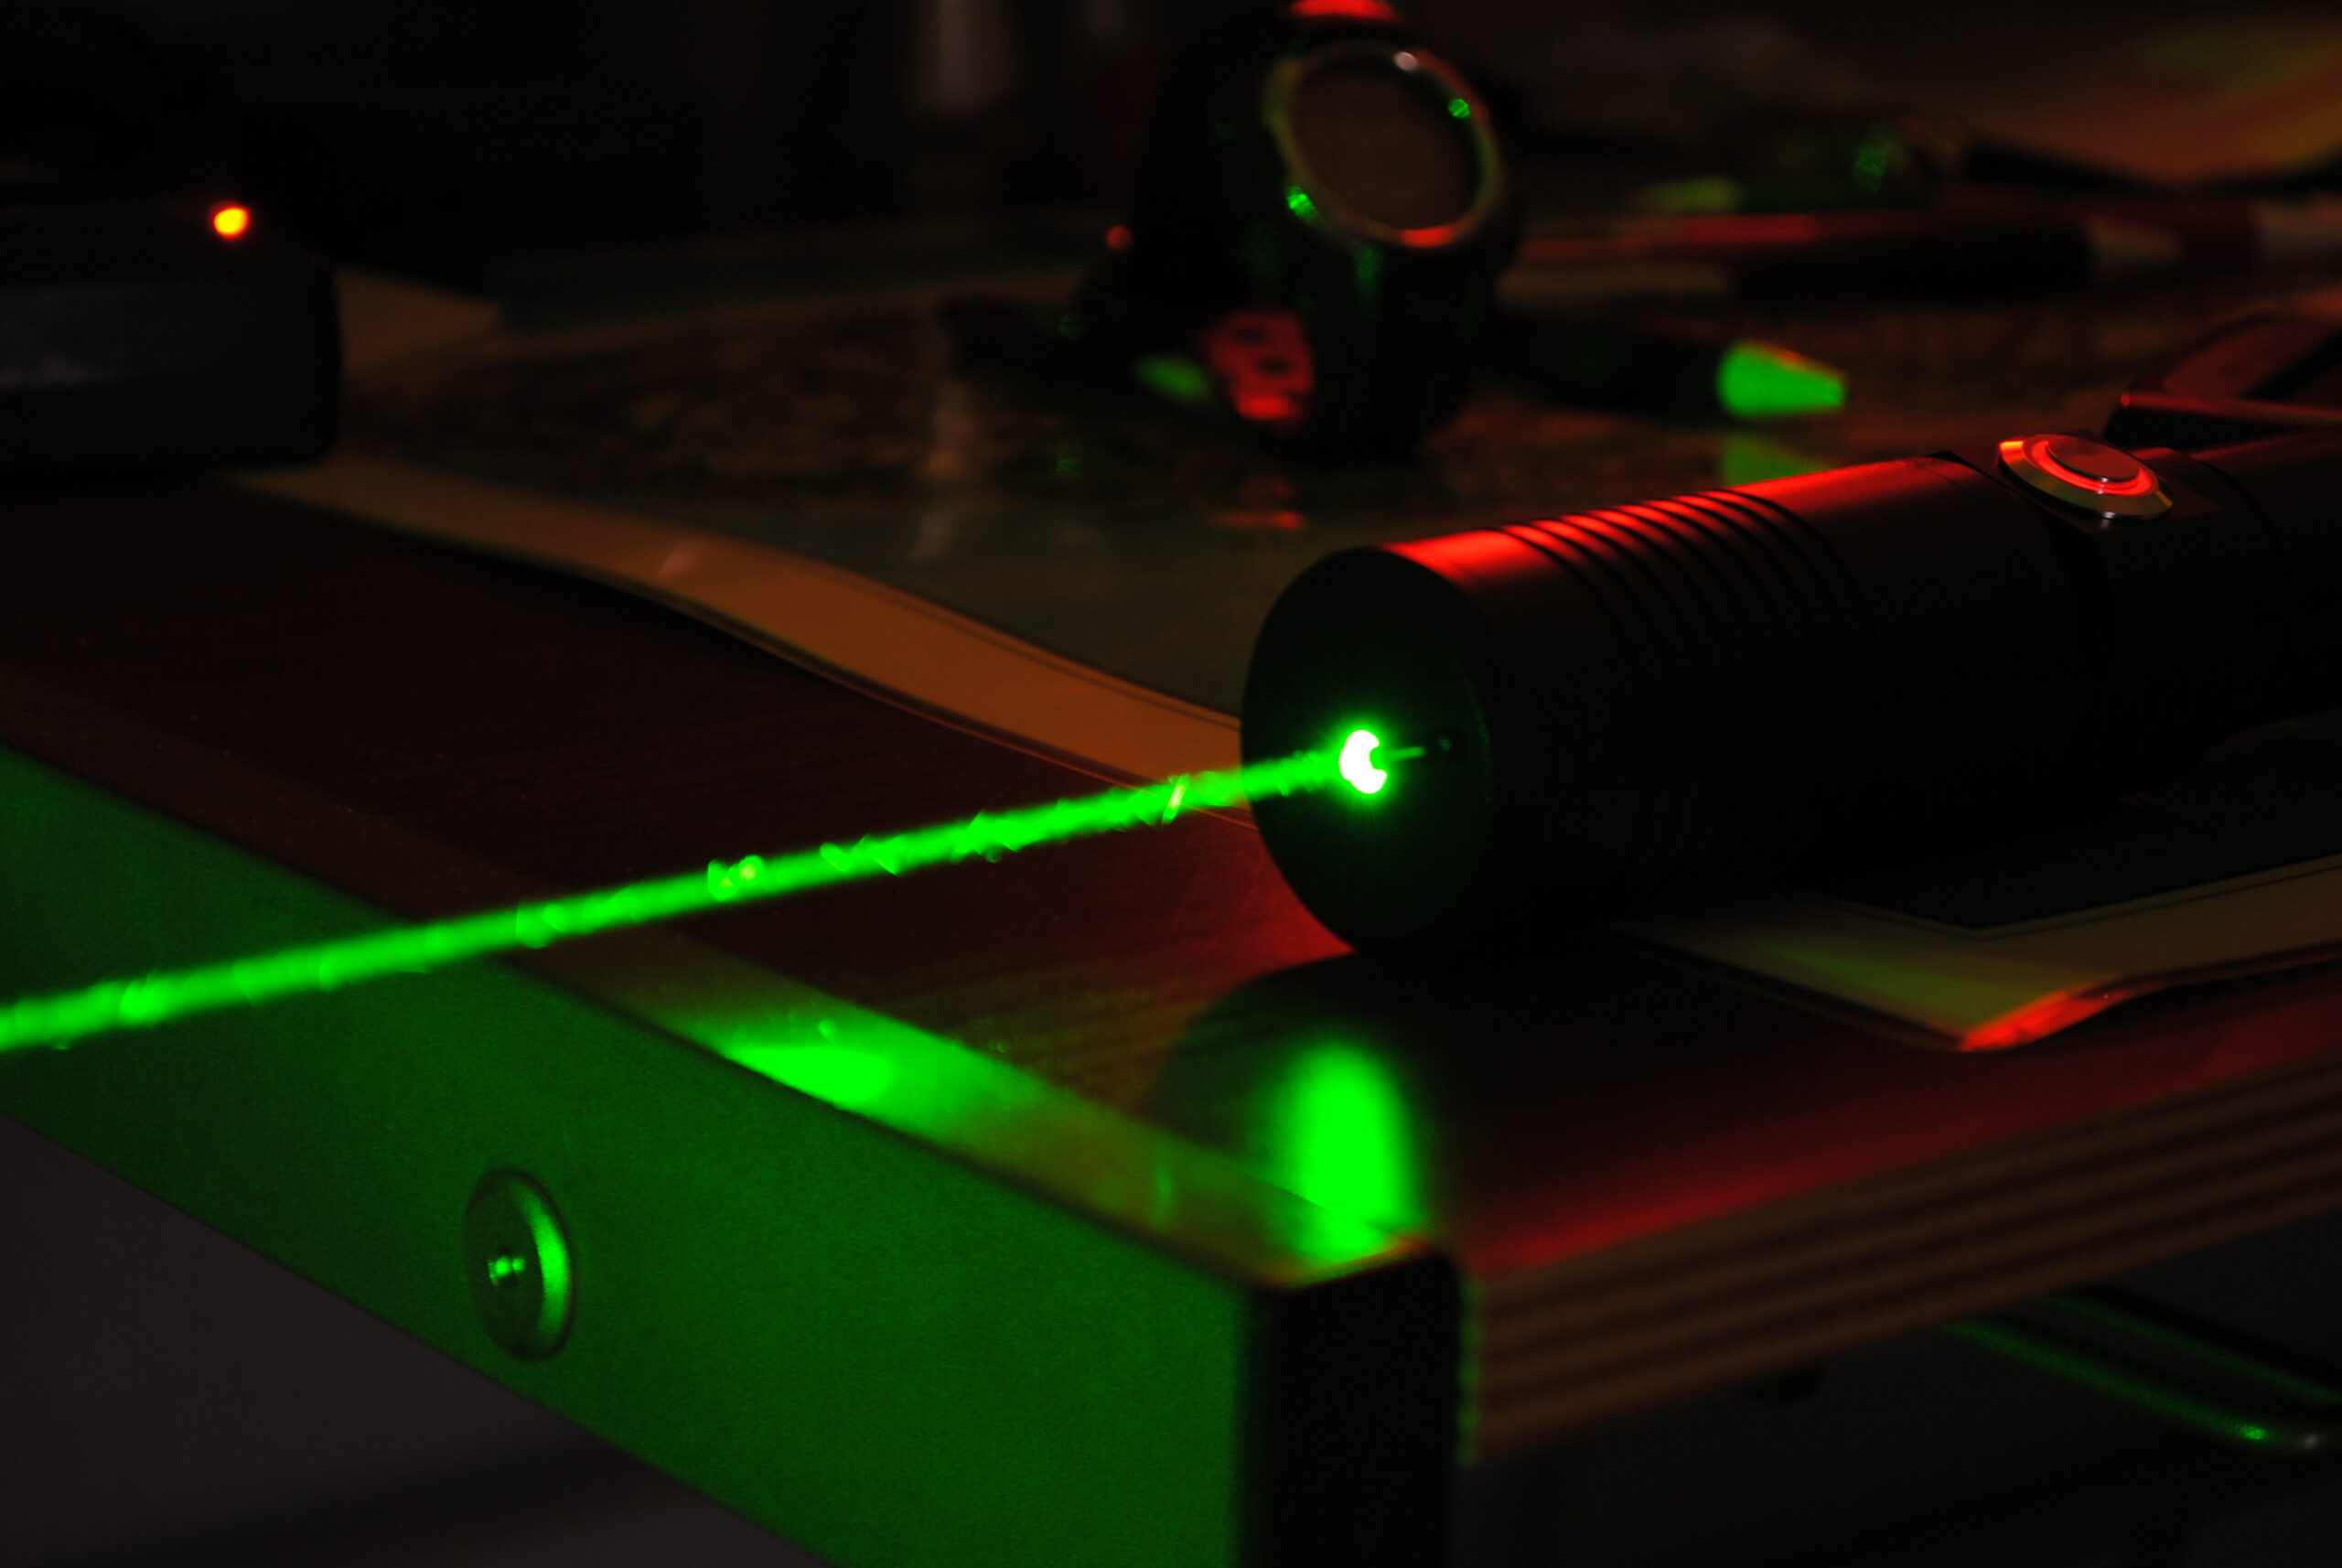 How Does The FBI Catch People Who Shine Lasers At Airplanes?